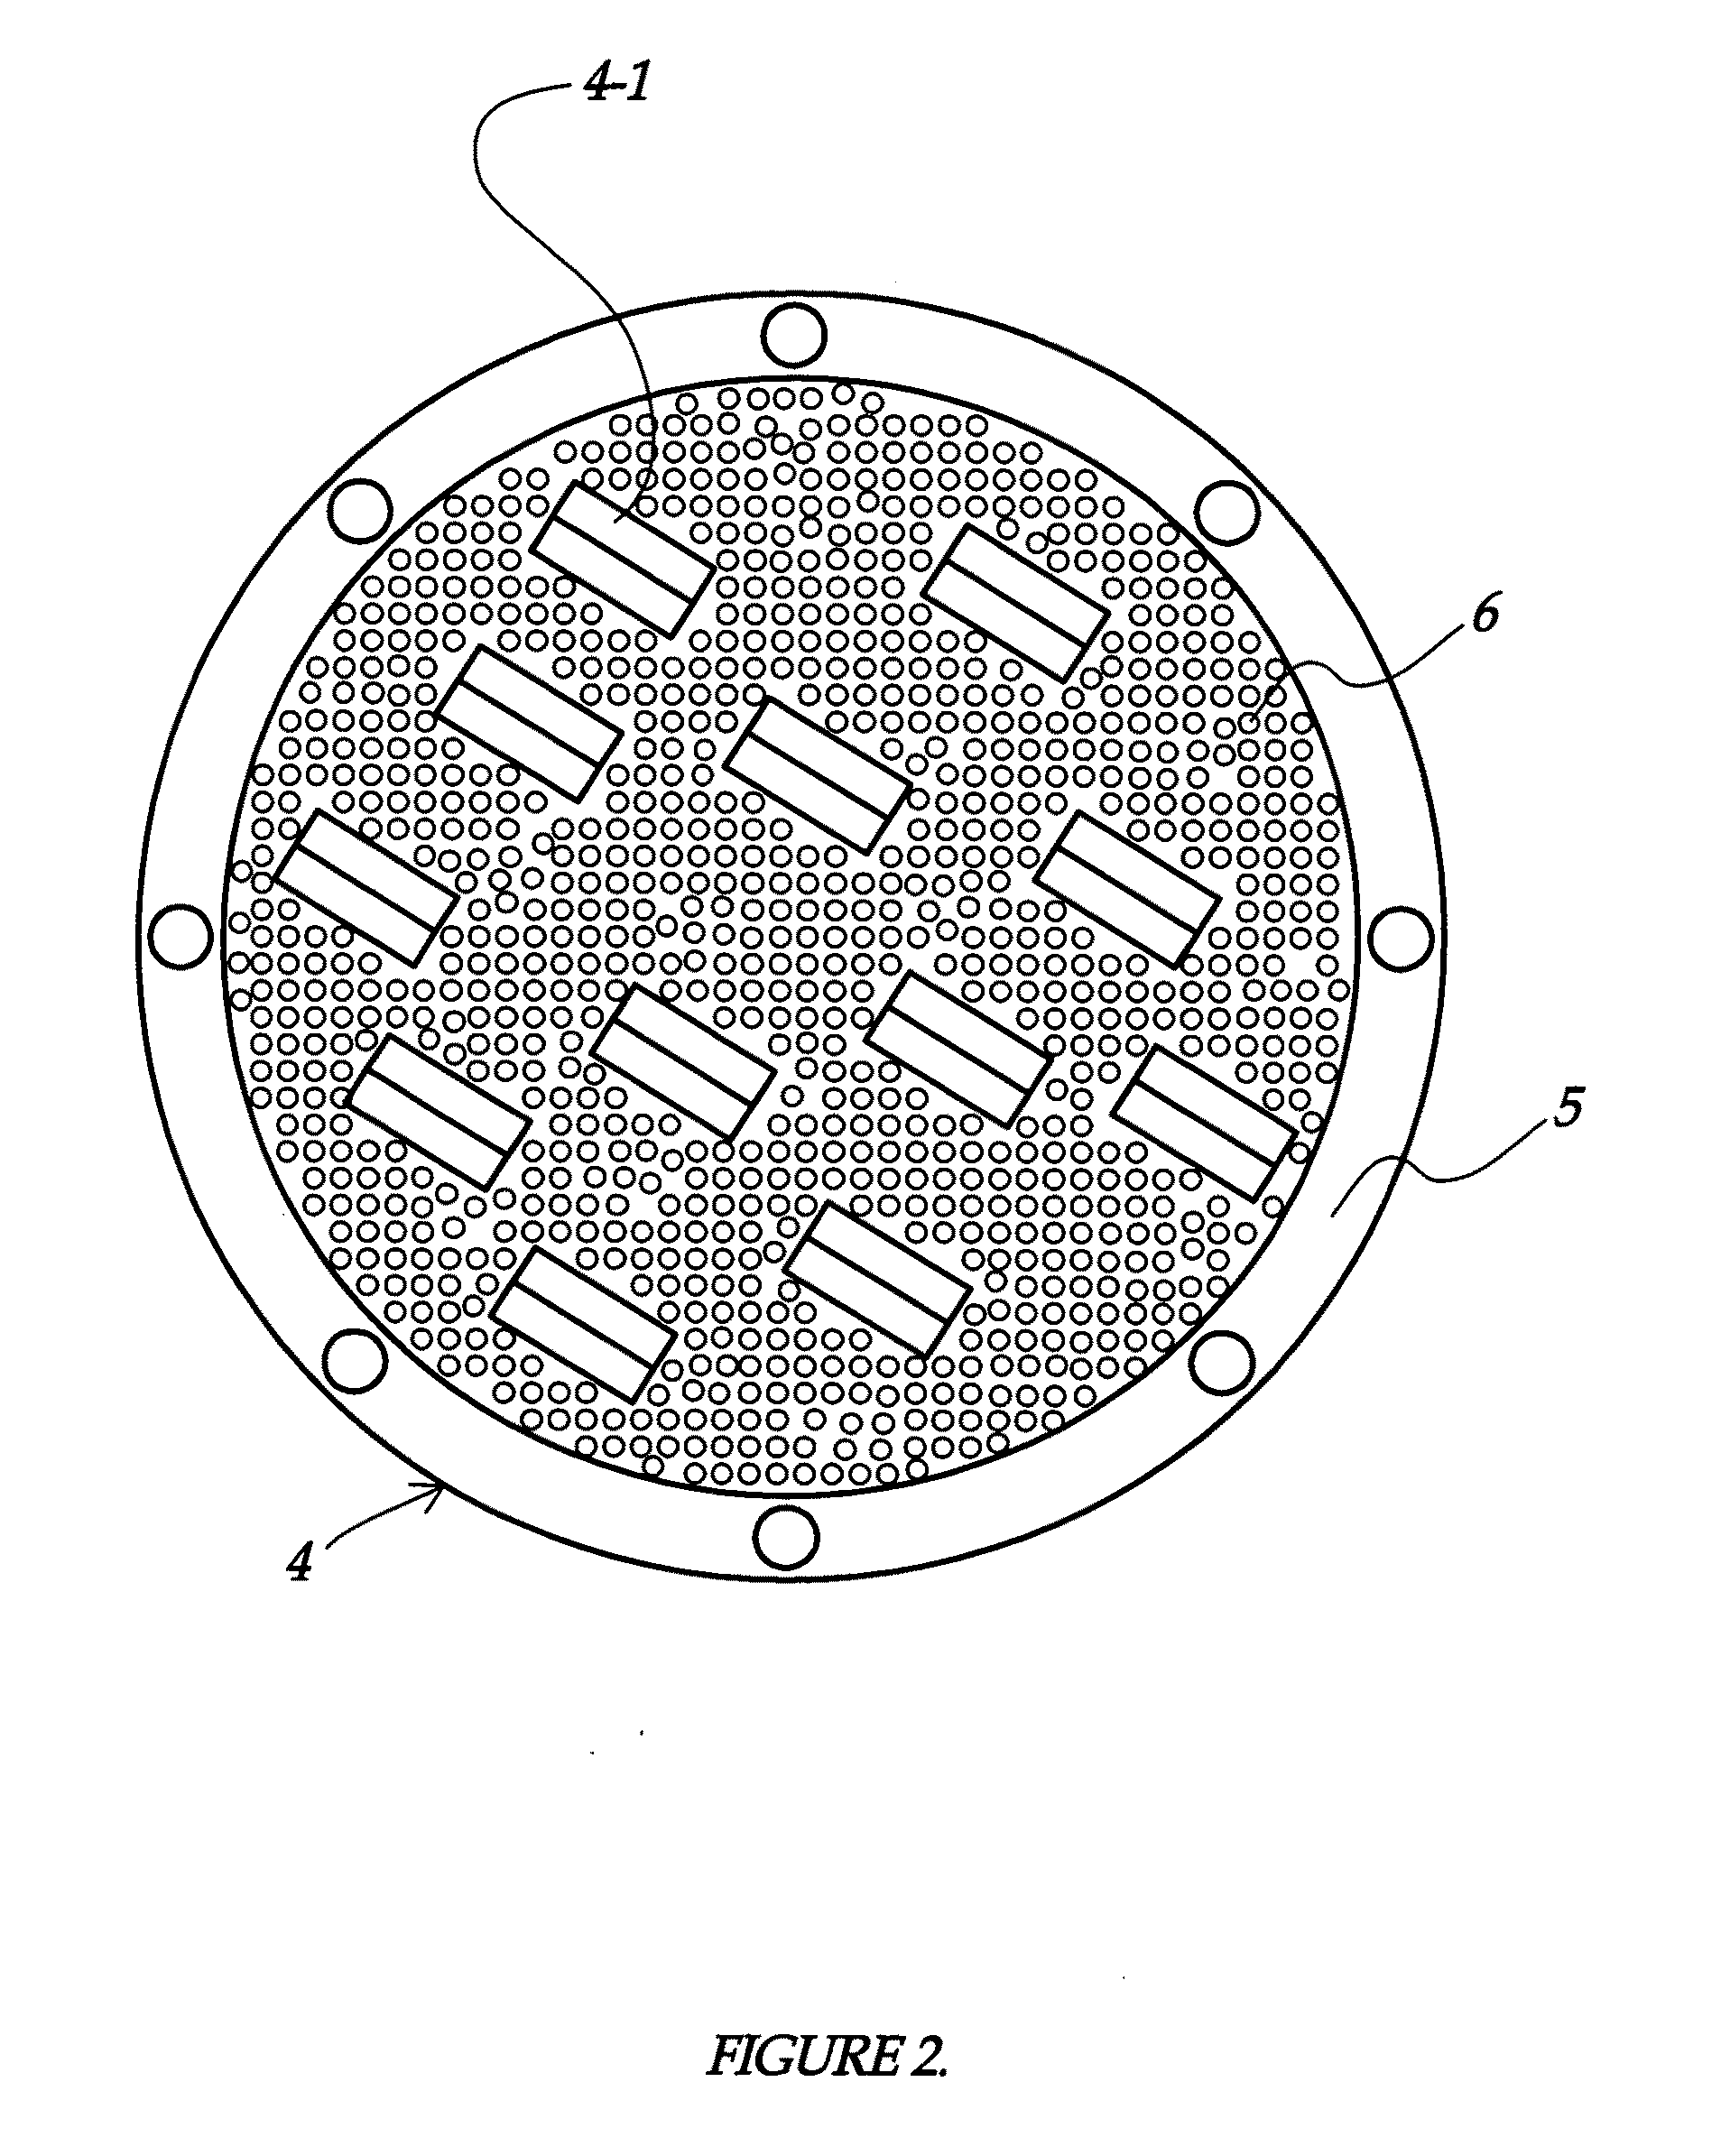 Method of producing trichlorosilane (TCS) rich Chlorosilane product stably from a fluidized gas phase reactor (FBR) and the structure of the reactor